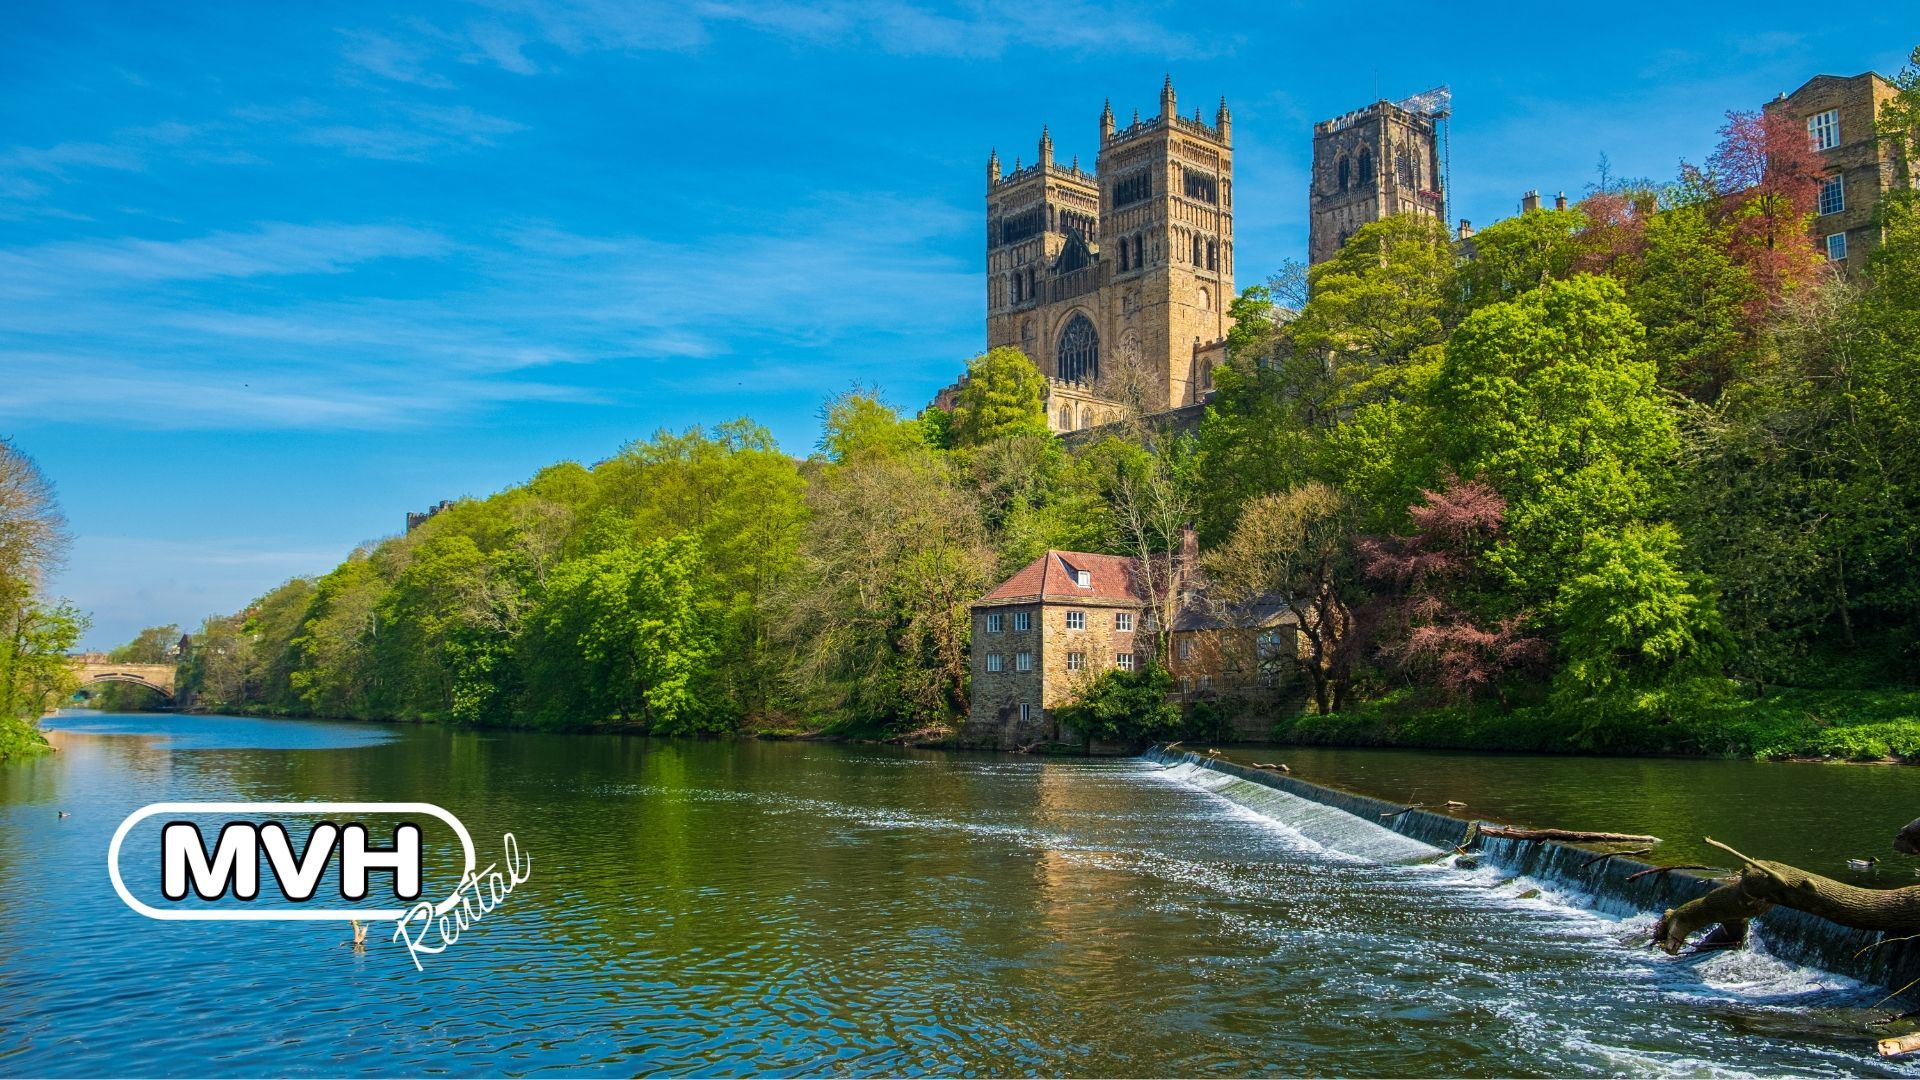 Discover some of the best places to visit in Durham, England – all easily accessible in your hire car.
